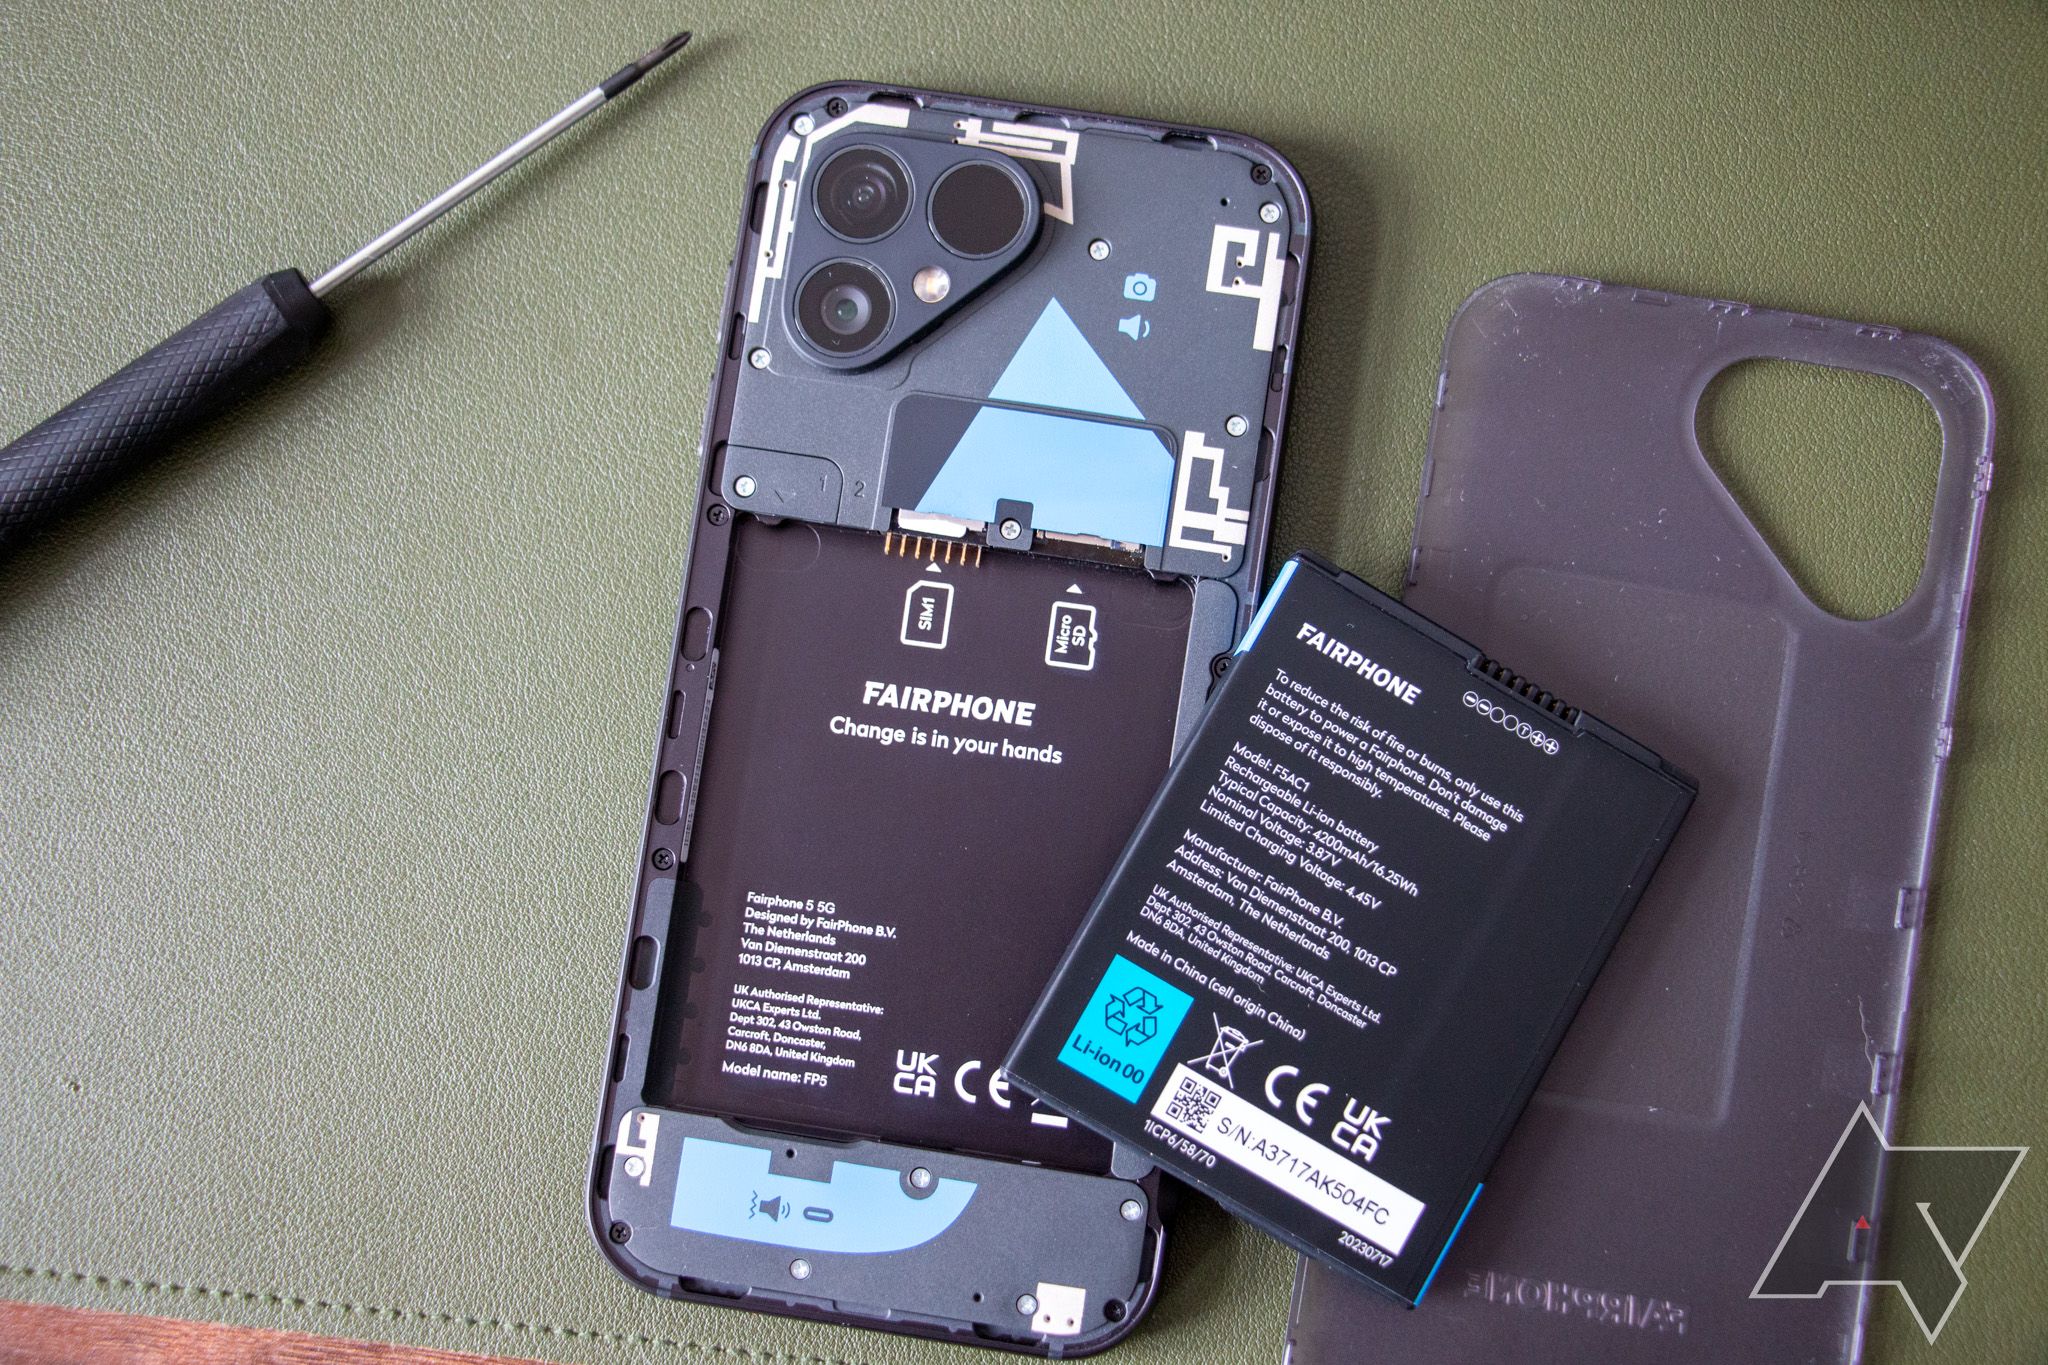 Fairphone wants to finally break out of its eco niche